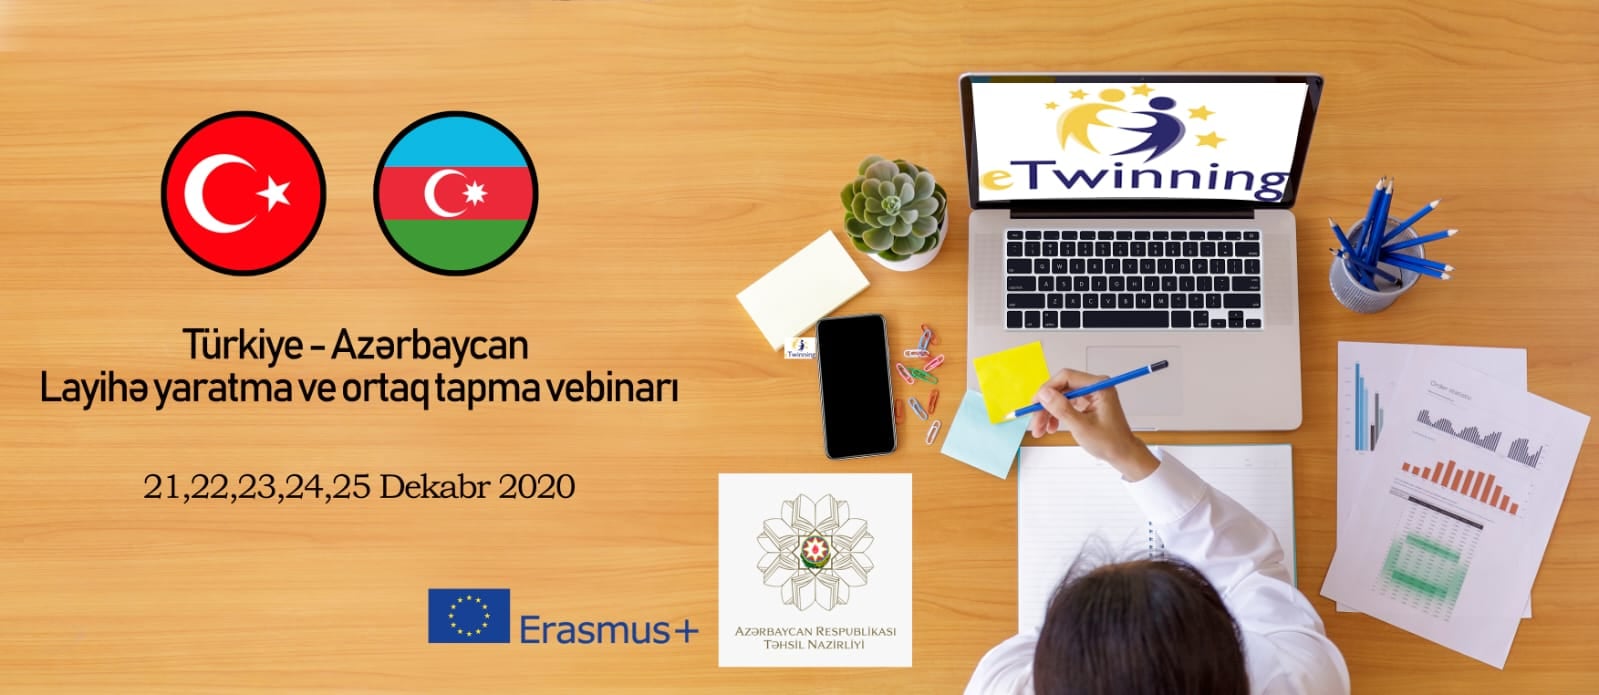 Are you planning an "Etwinning" project?